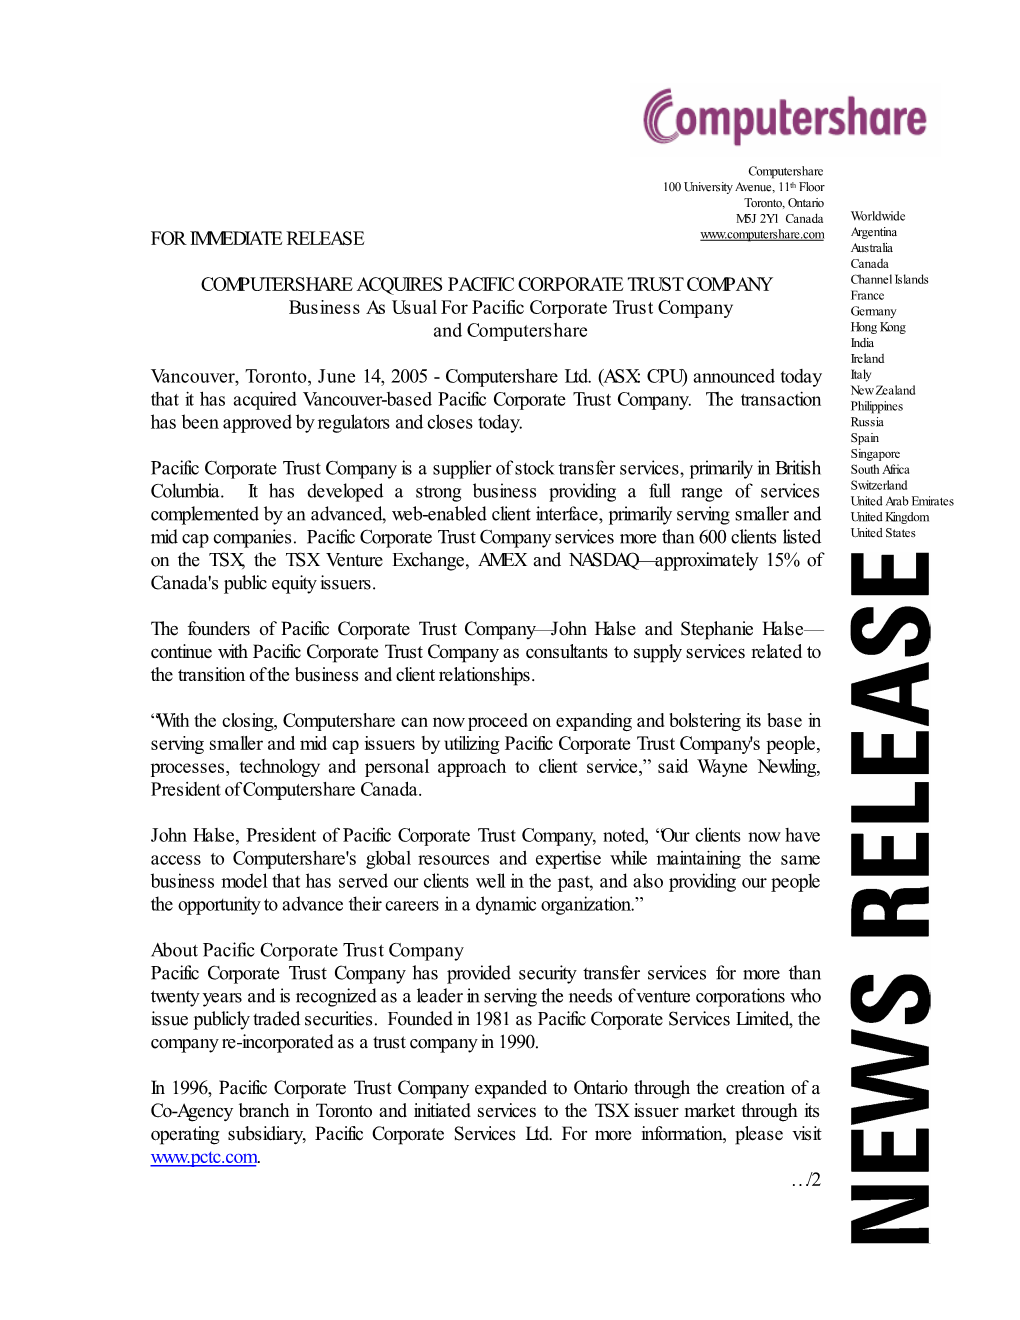 PCTC News Release